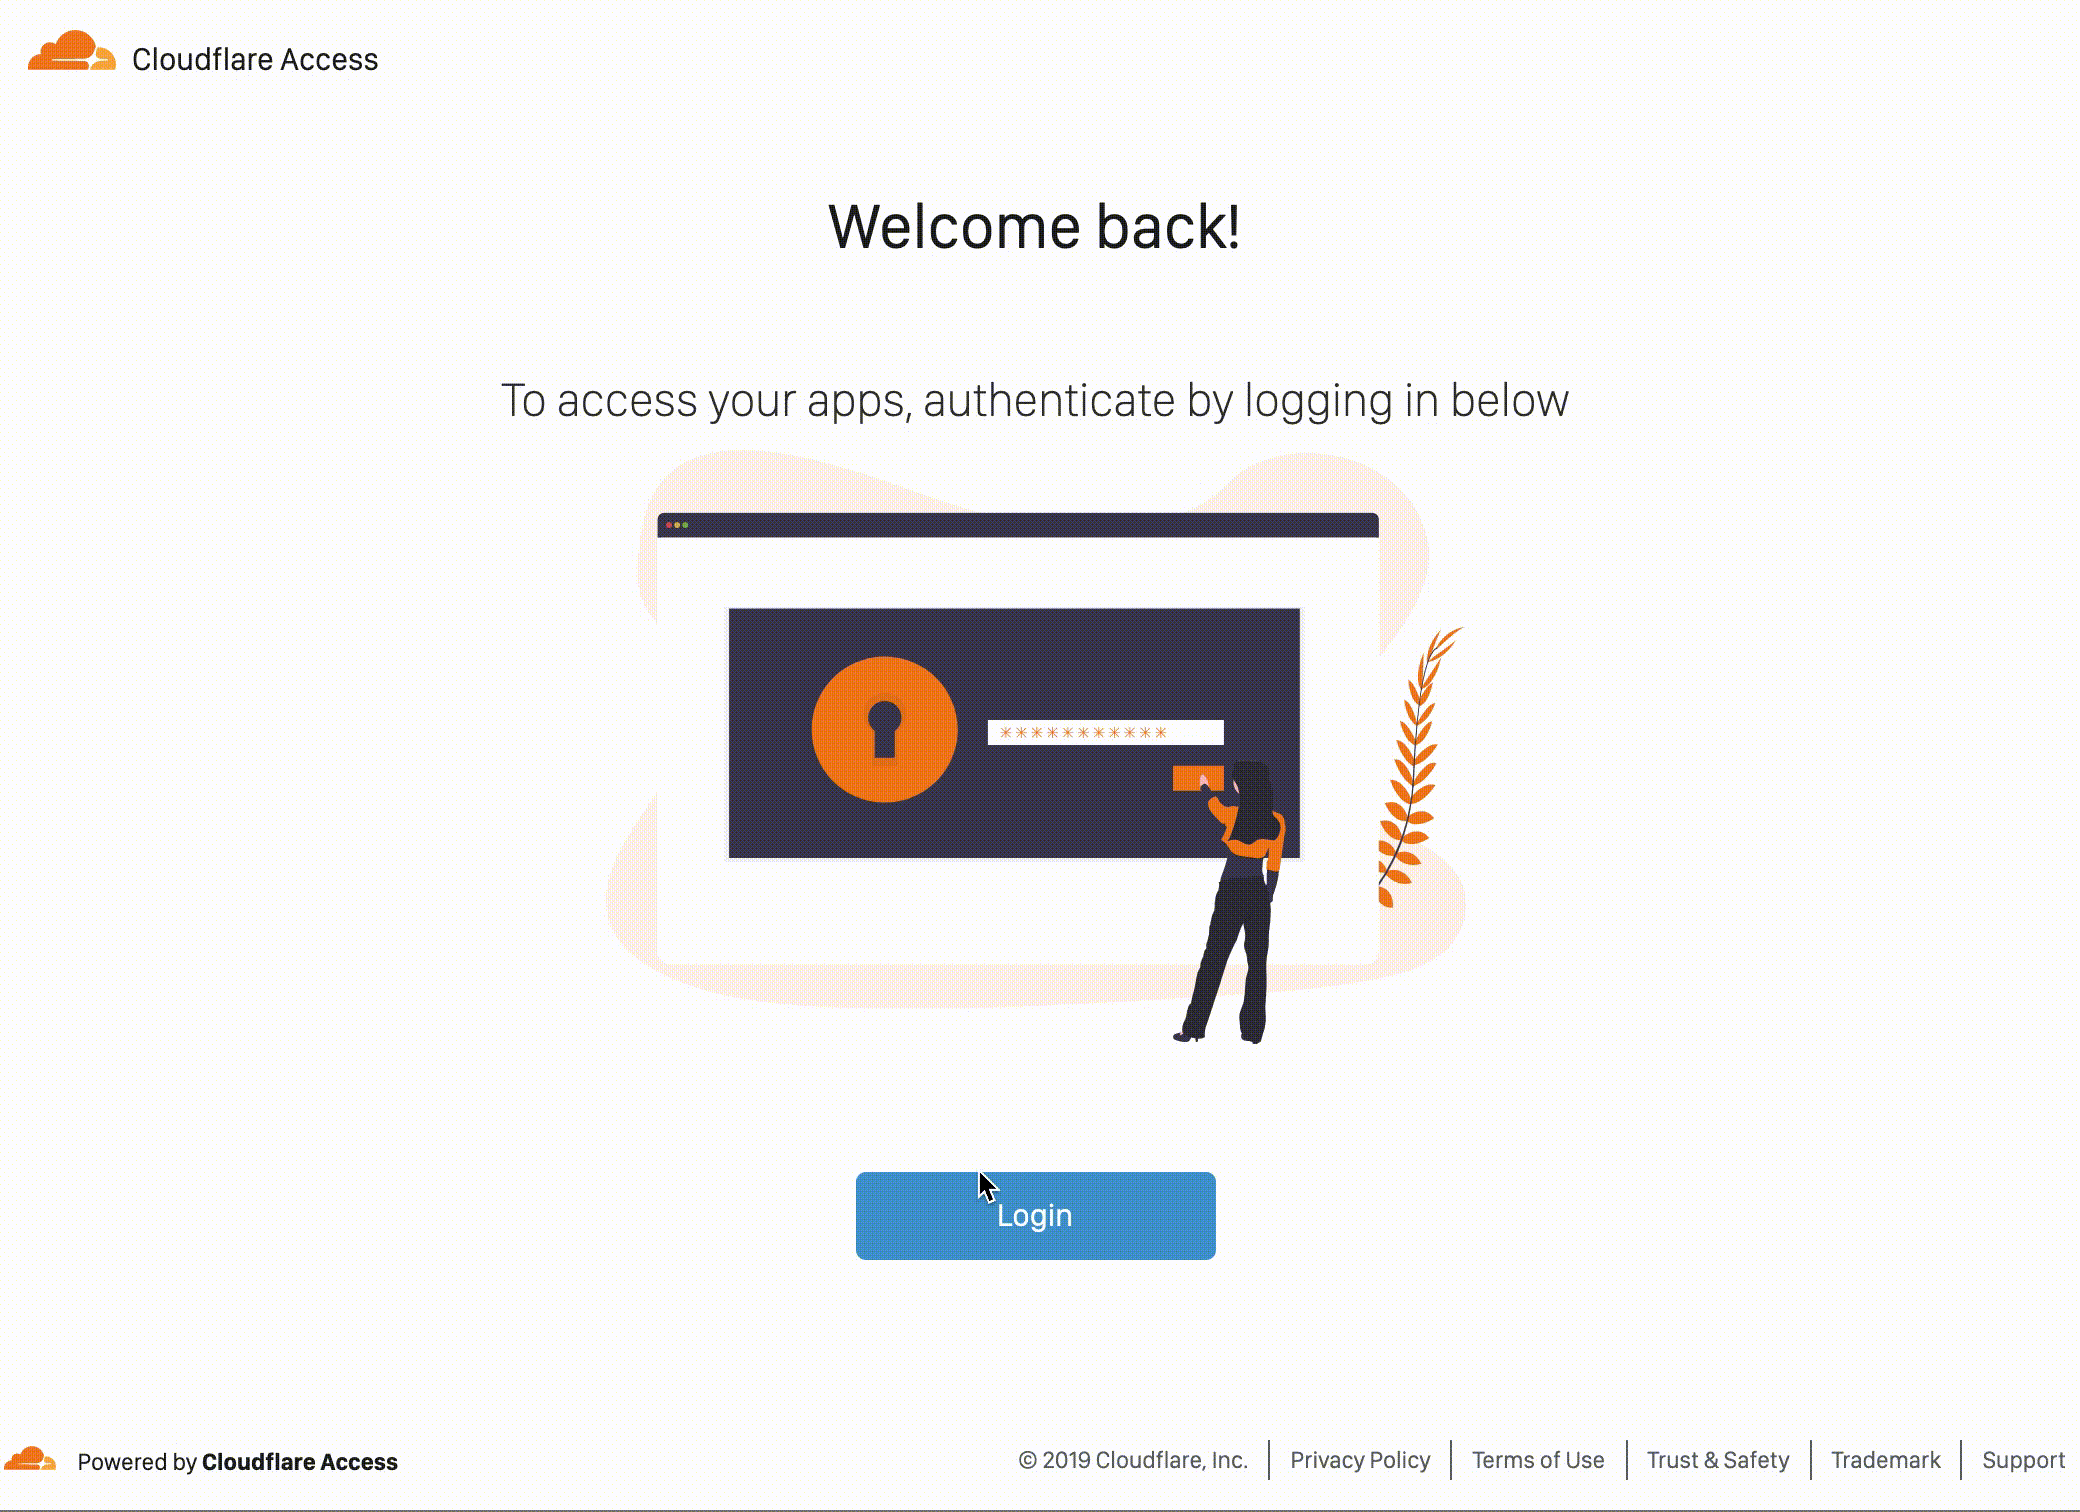 Announcing the Cloudflare Access App Launch